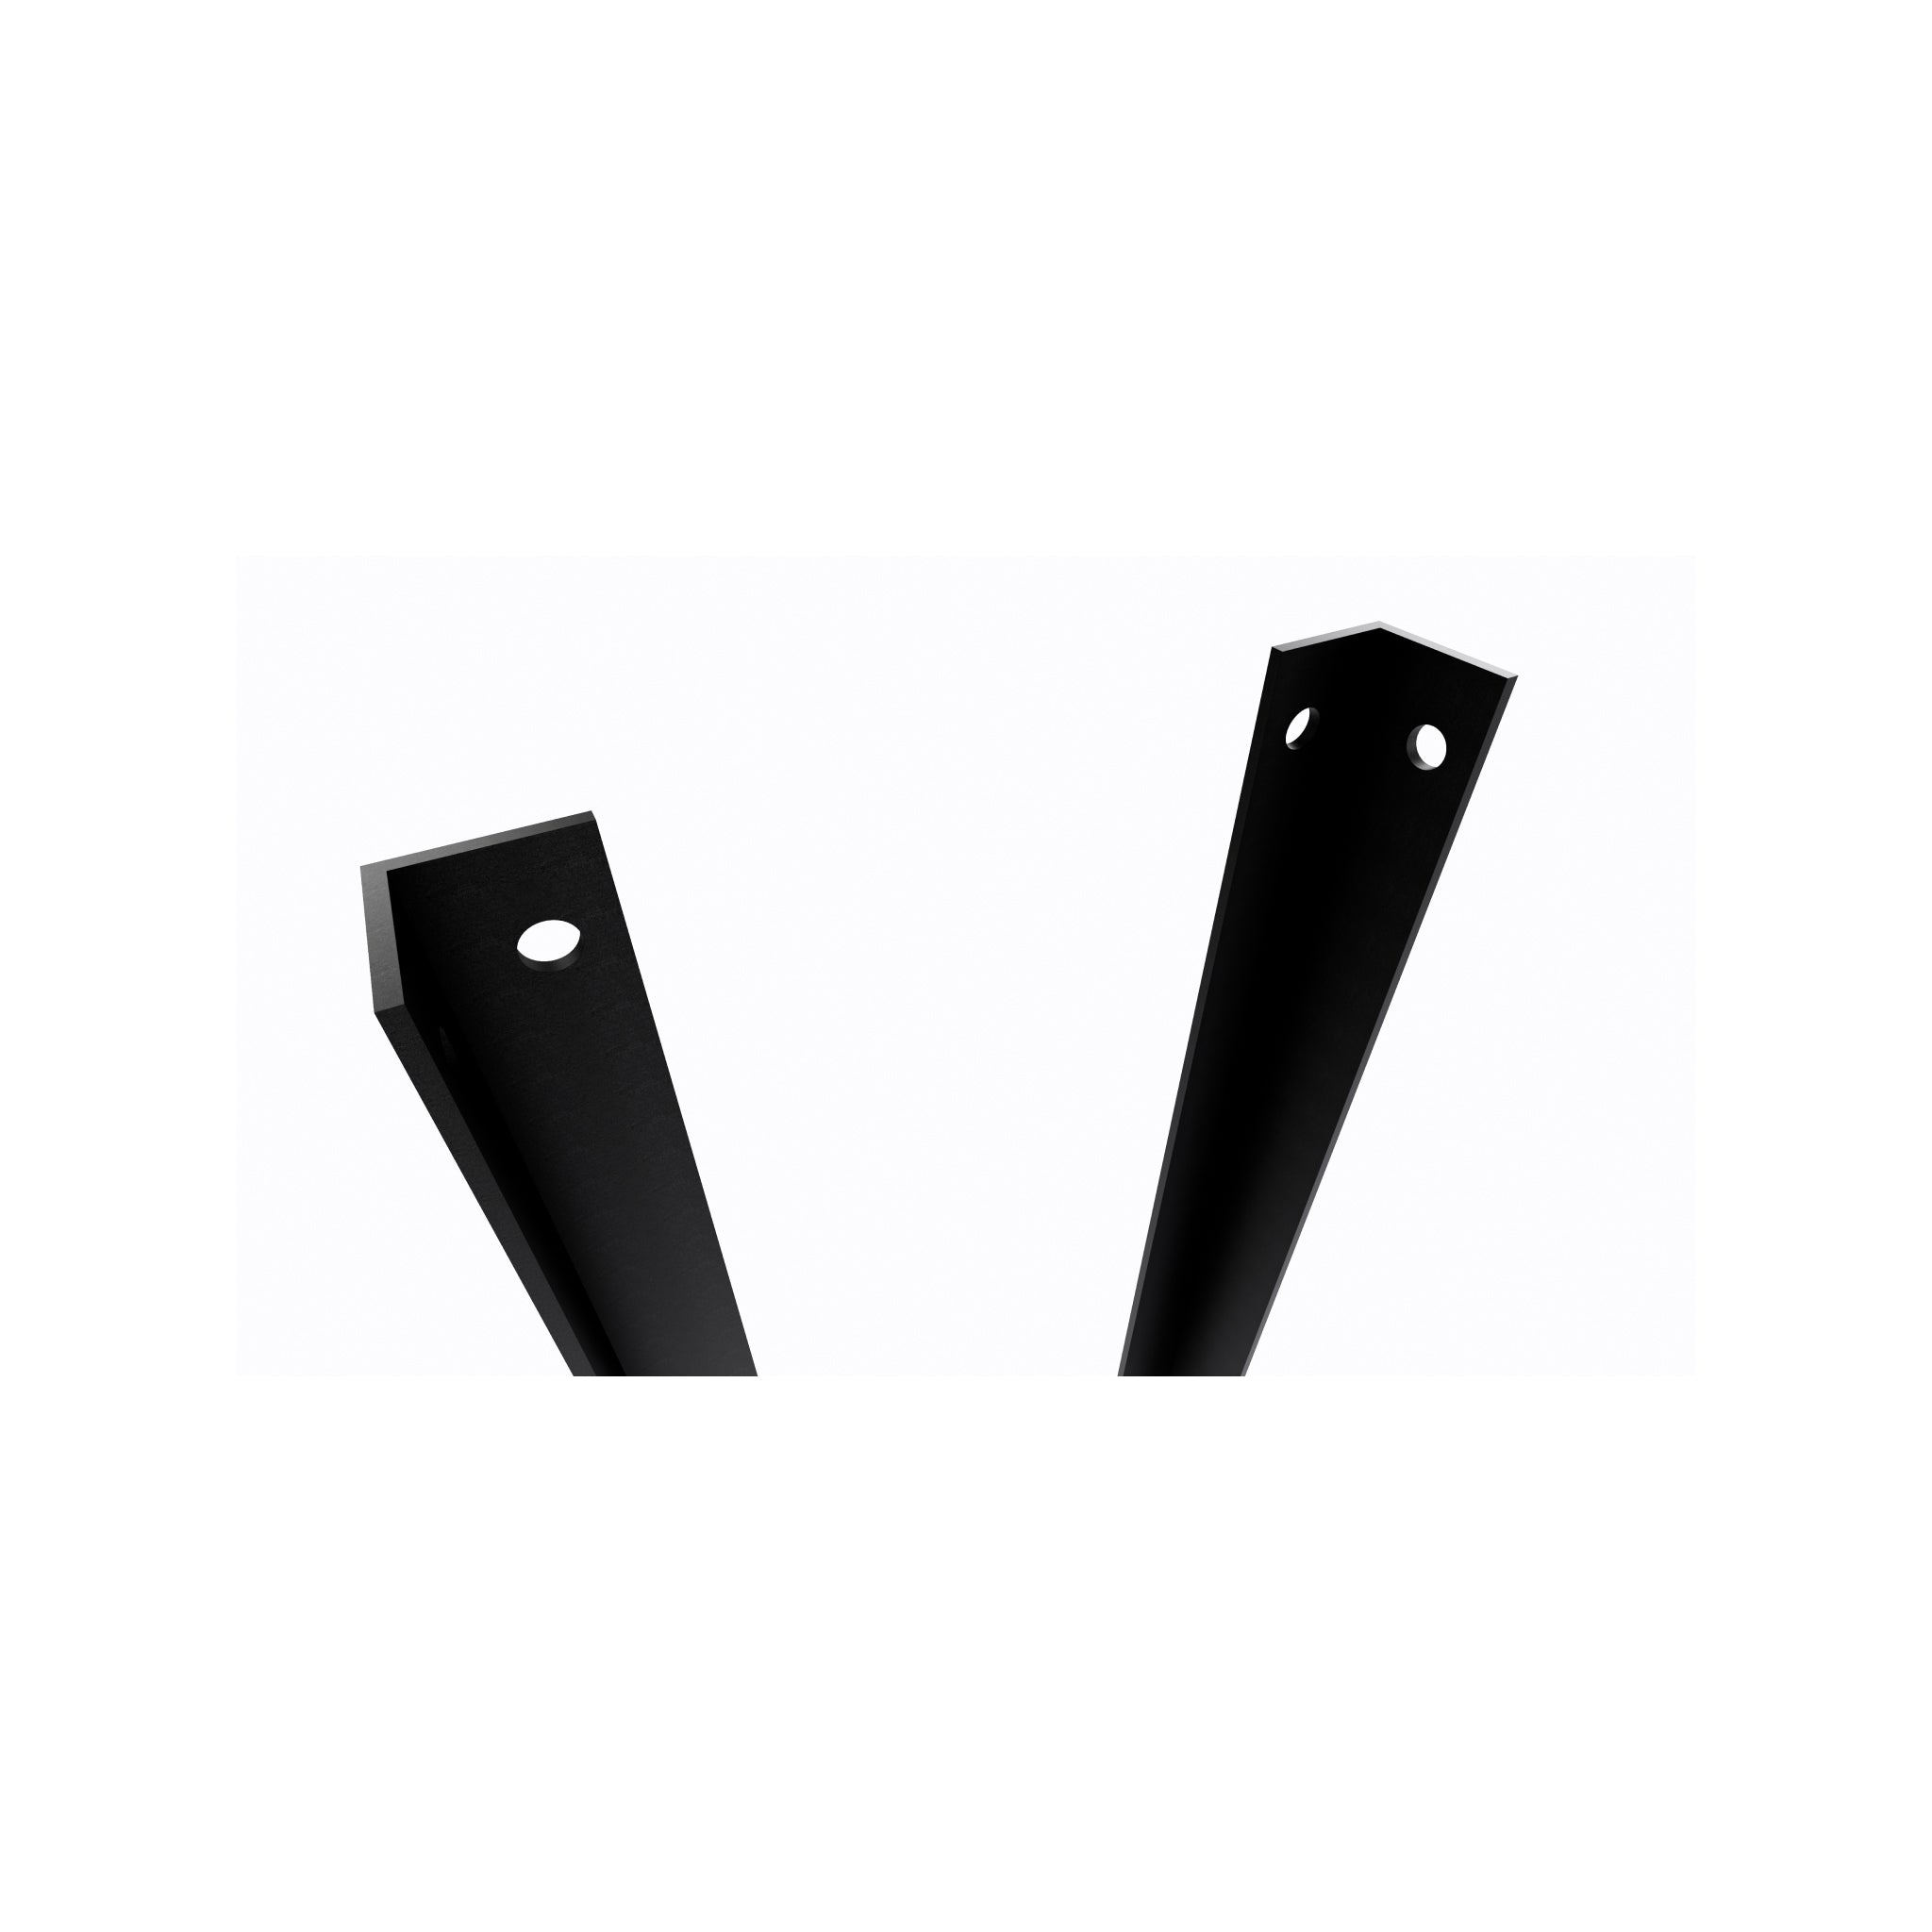 Mounting Brackets - Pack of 2